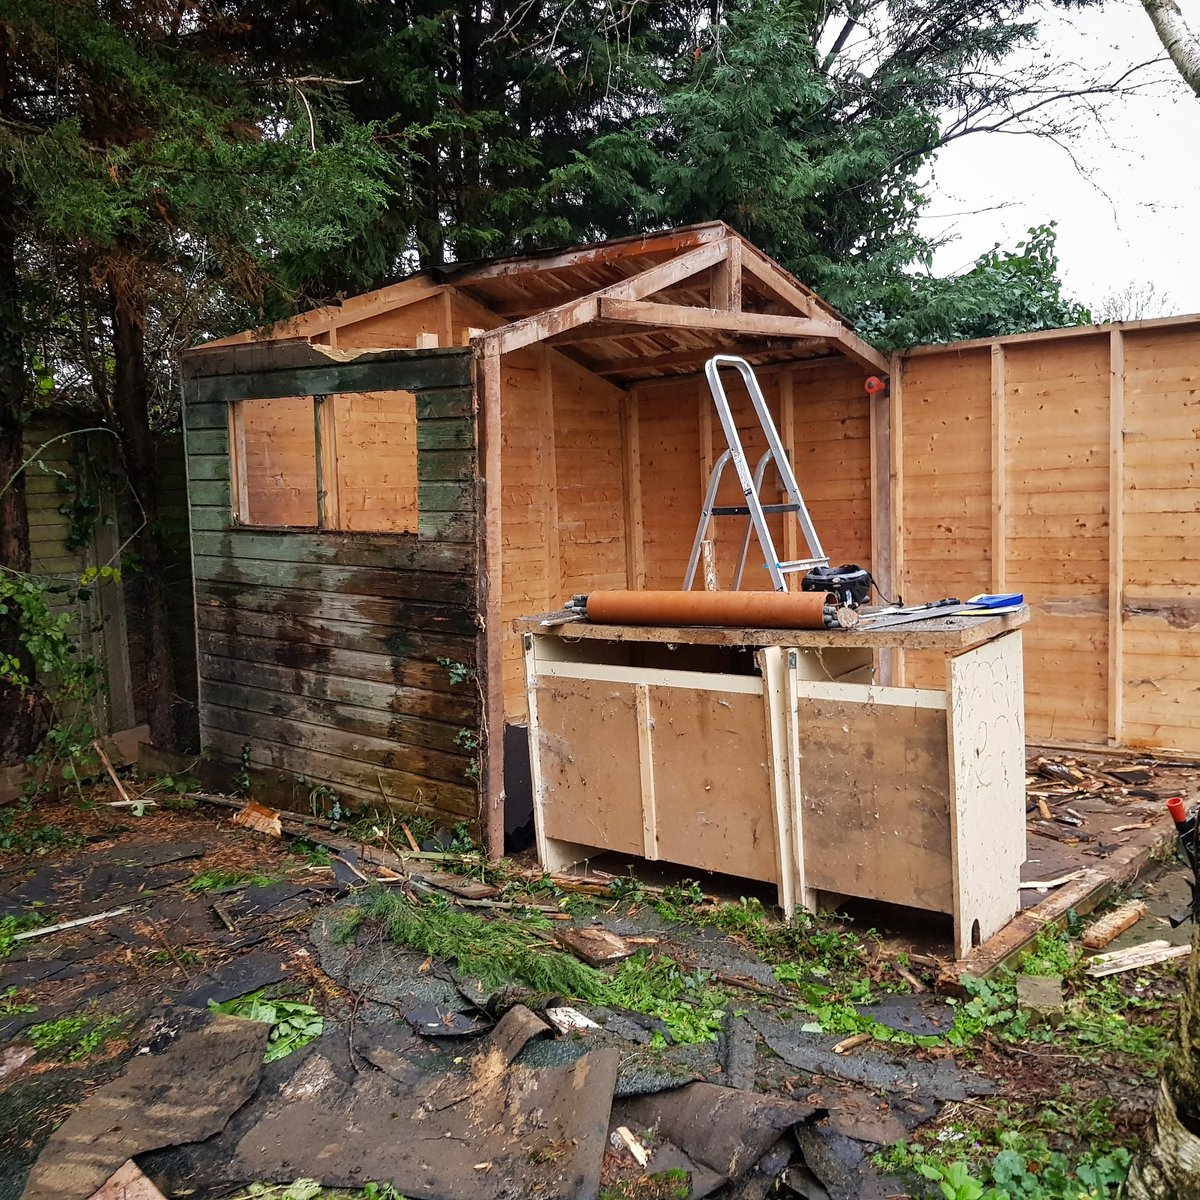 Project 'dismantle' has begun. Out with the old rotten #shed, and onto pruning back the surrounding #trees.. This is fun! 😊 #garden #gardenfacelift